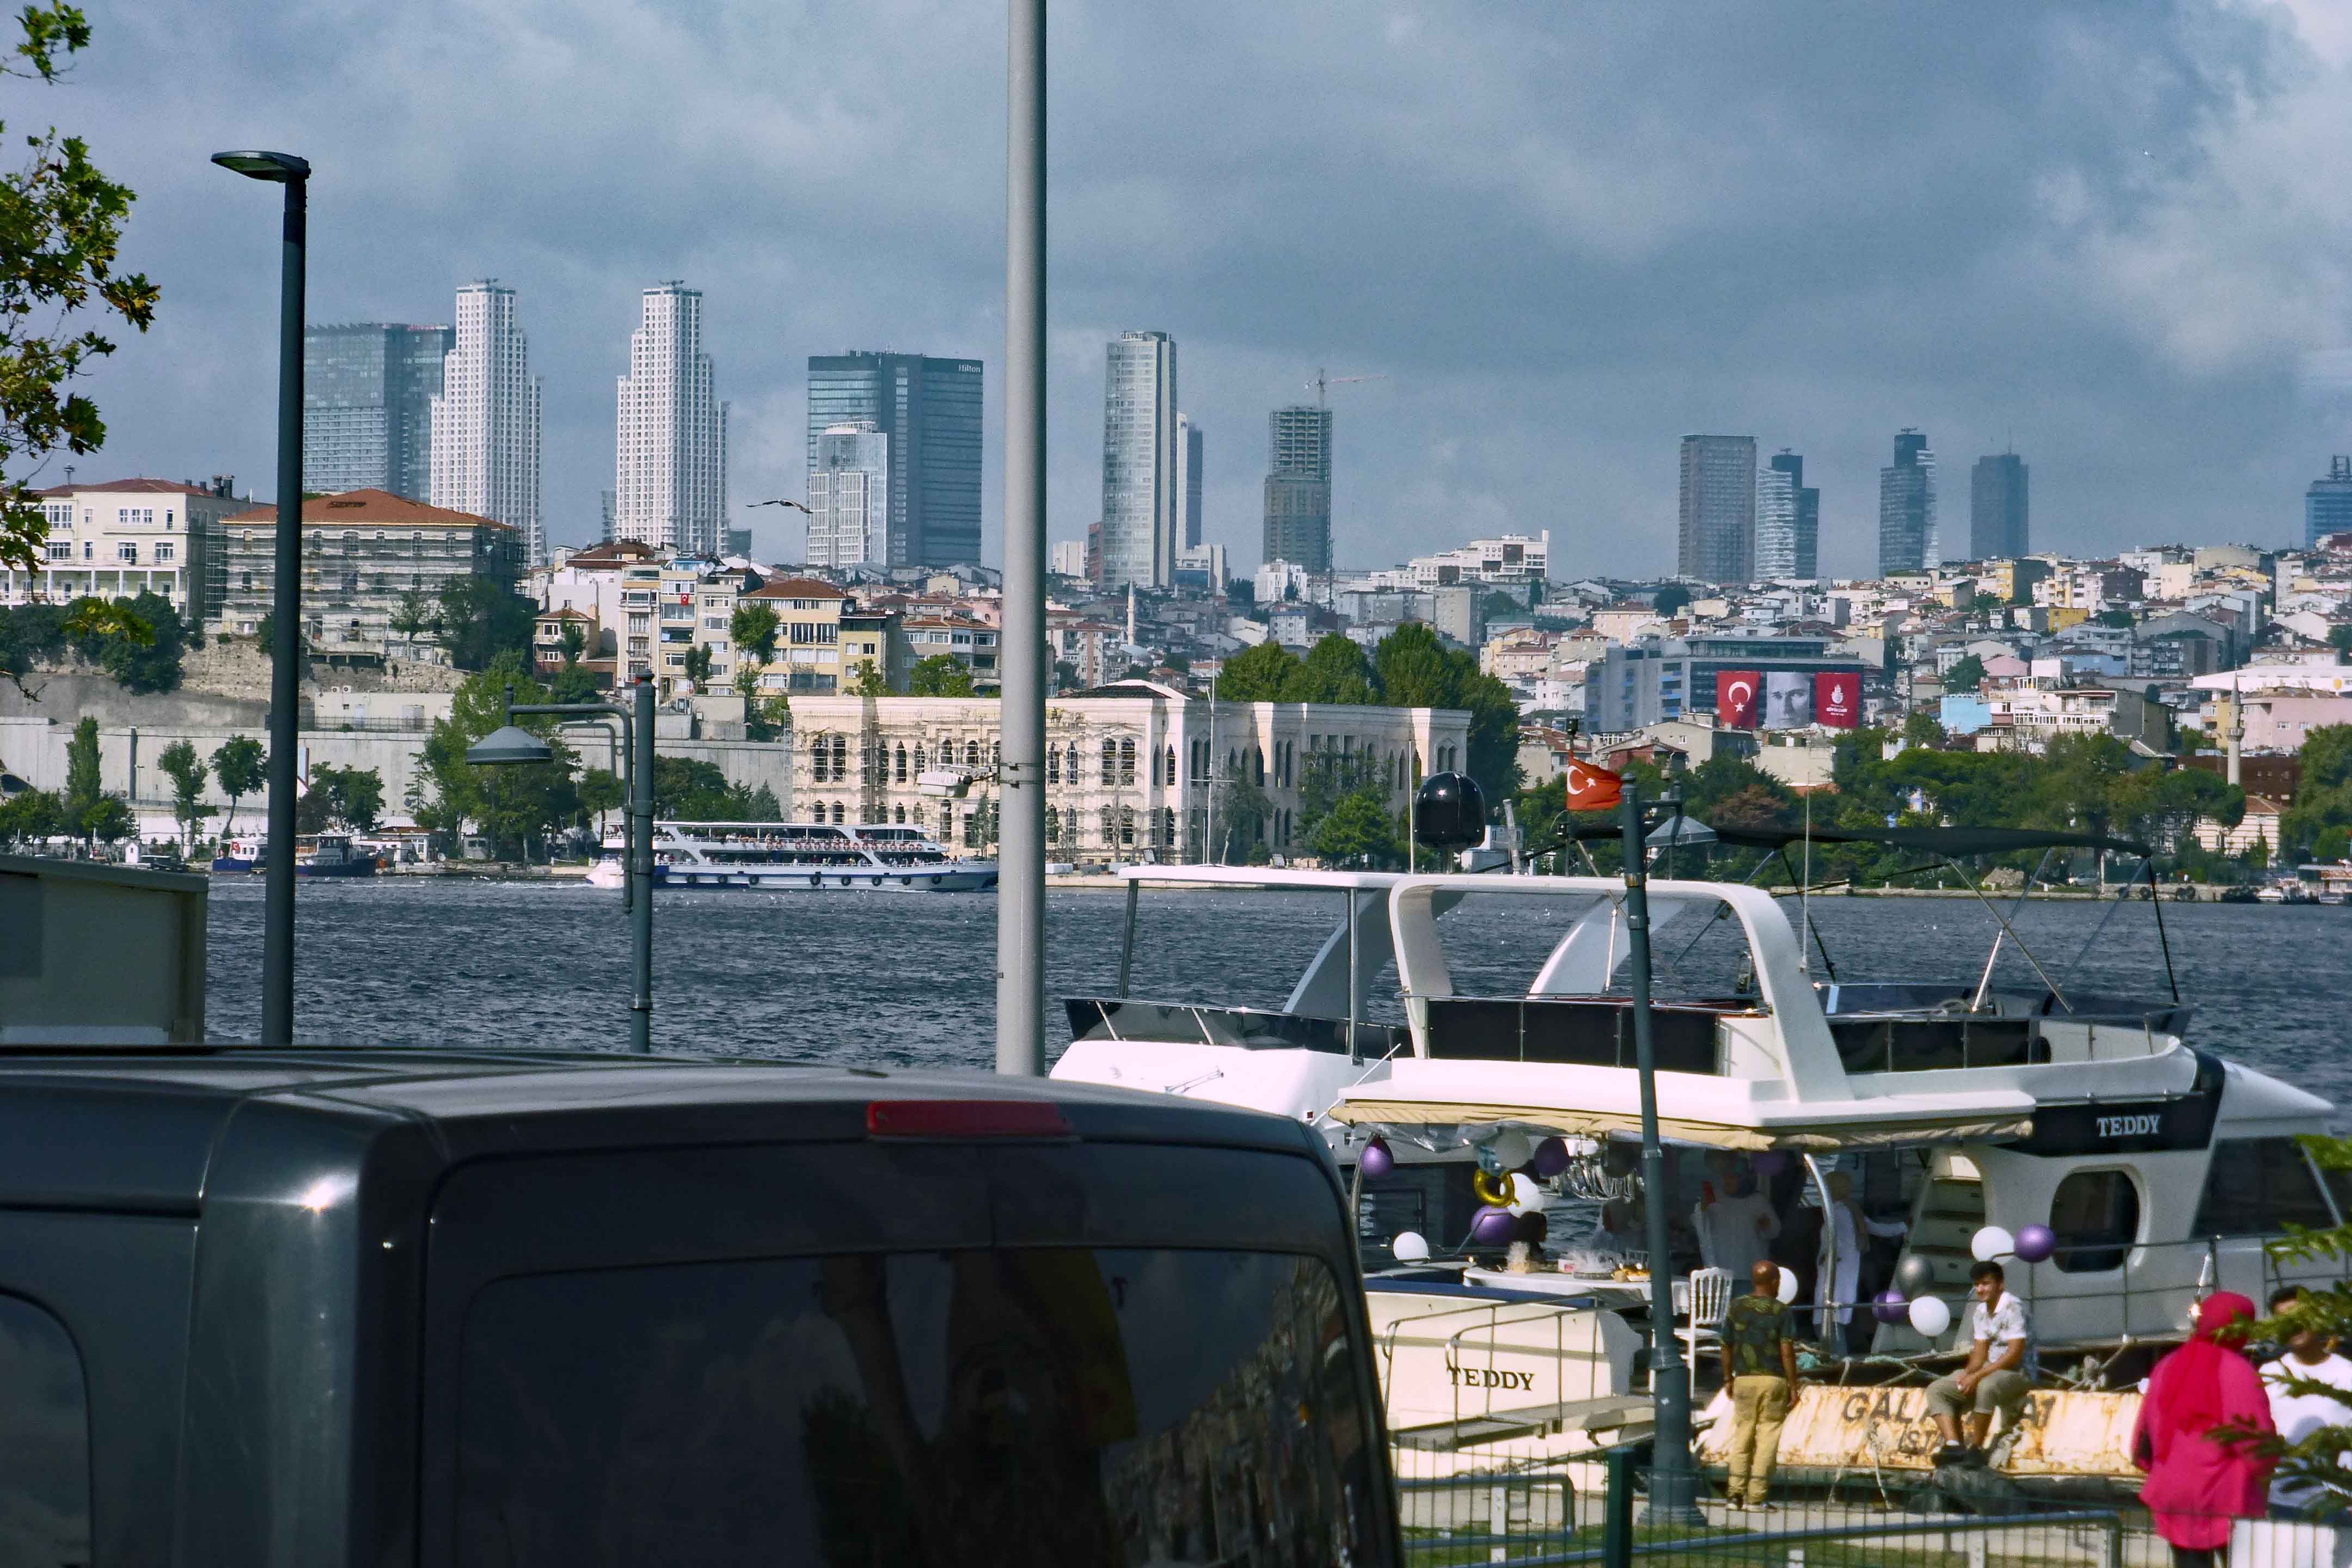 Skyline of Maslak, the main business district of Istanbul